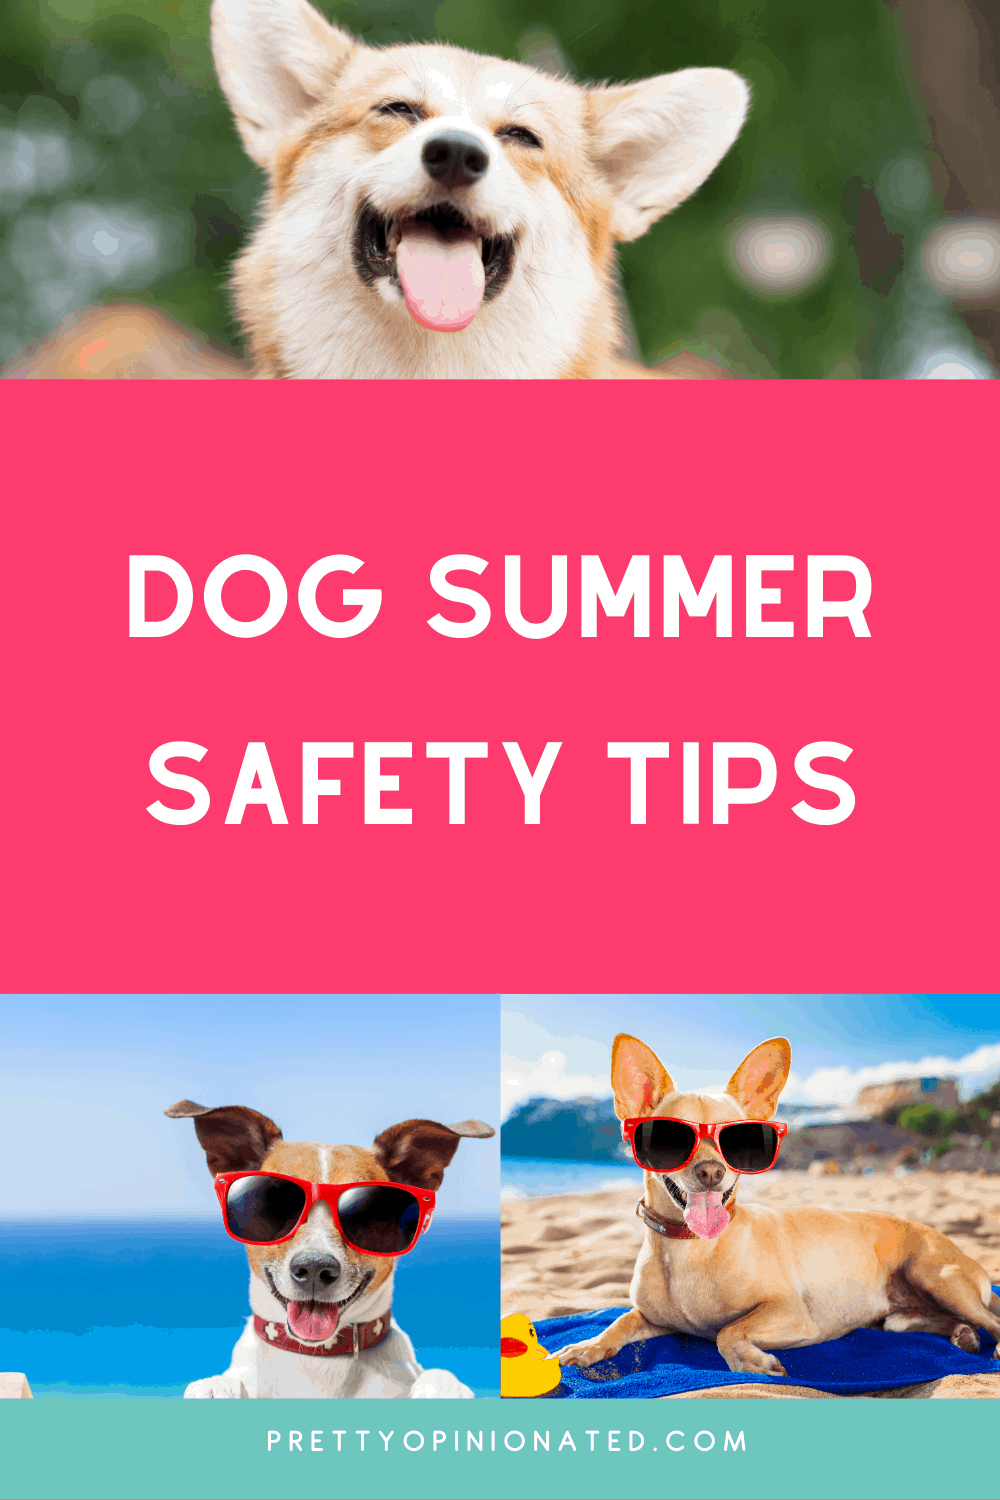 Here are a few key tips to help you keep your dog safe this summer.